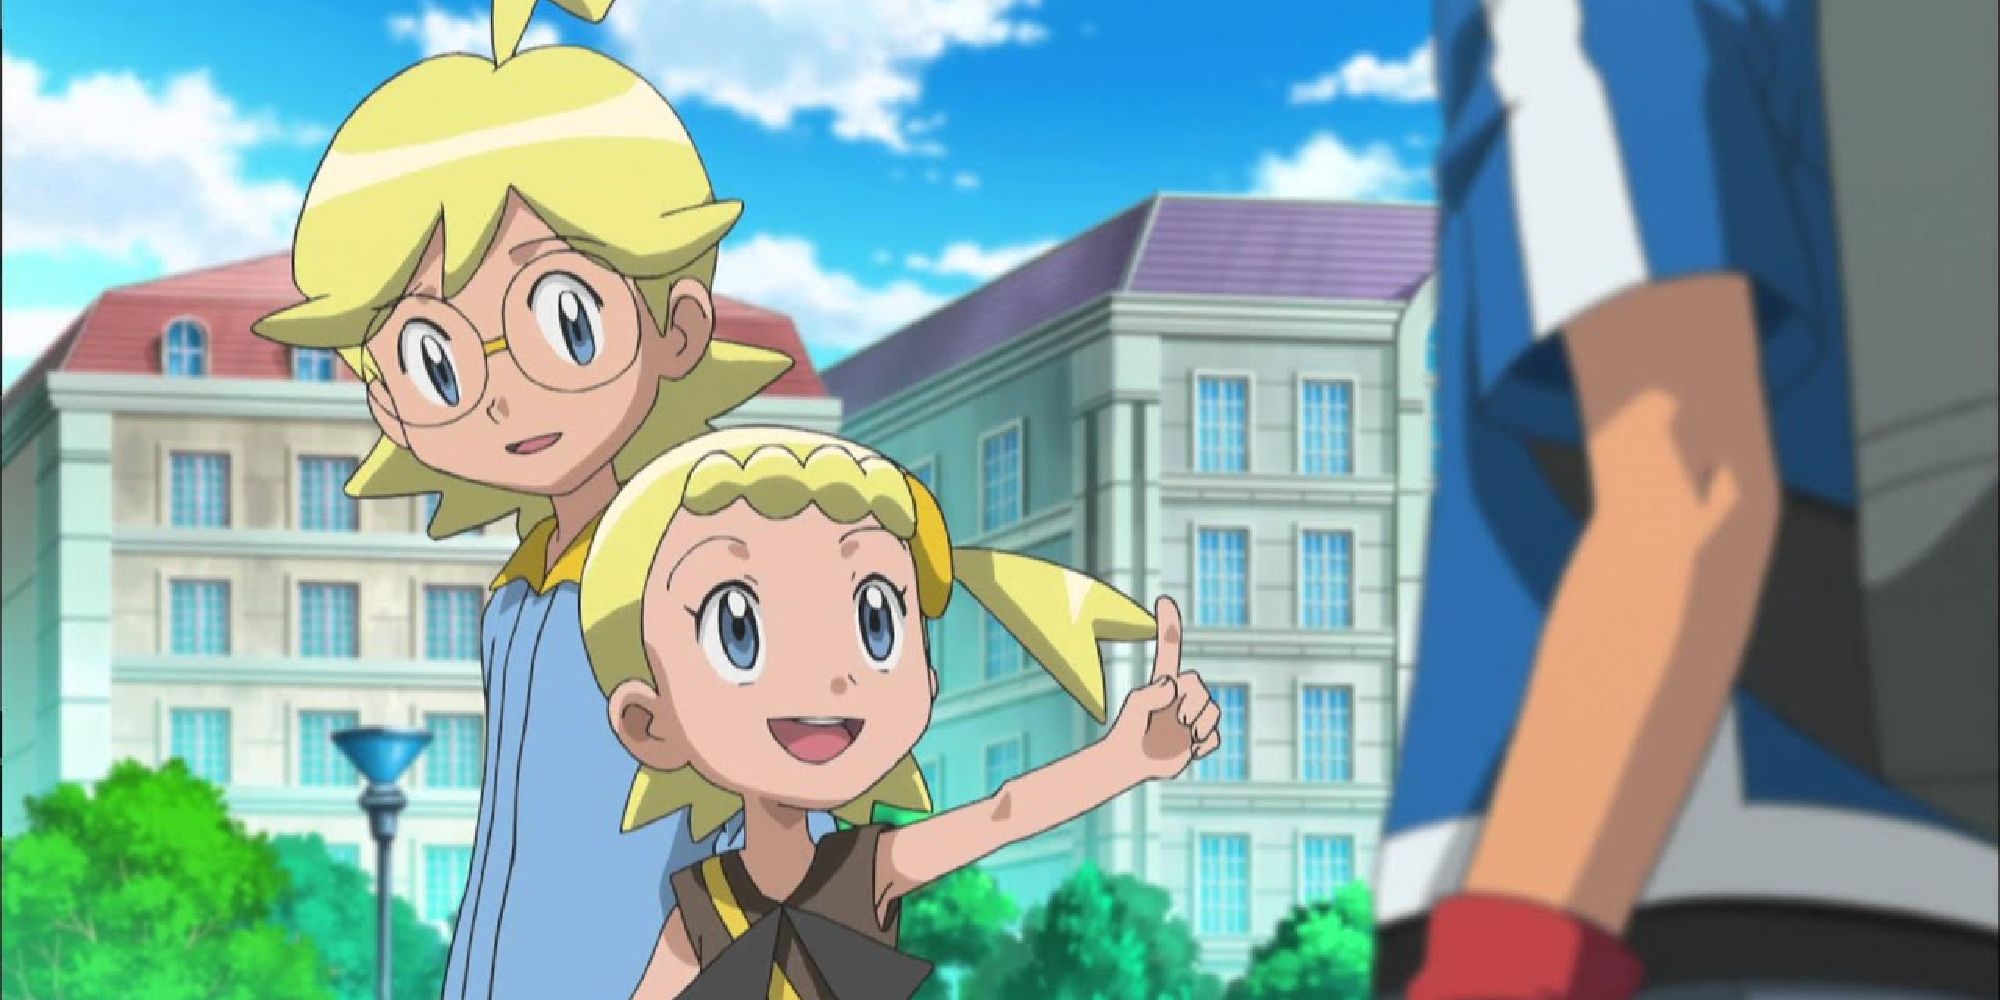 Clemont and Bonnie meeting Ash in Kalos